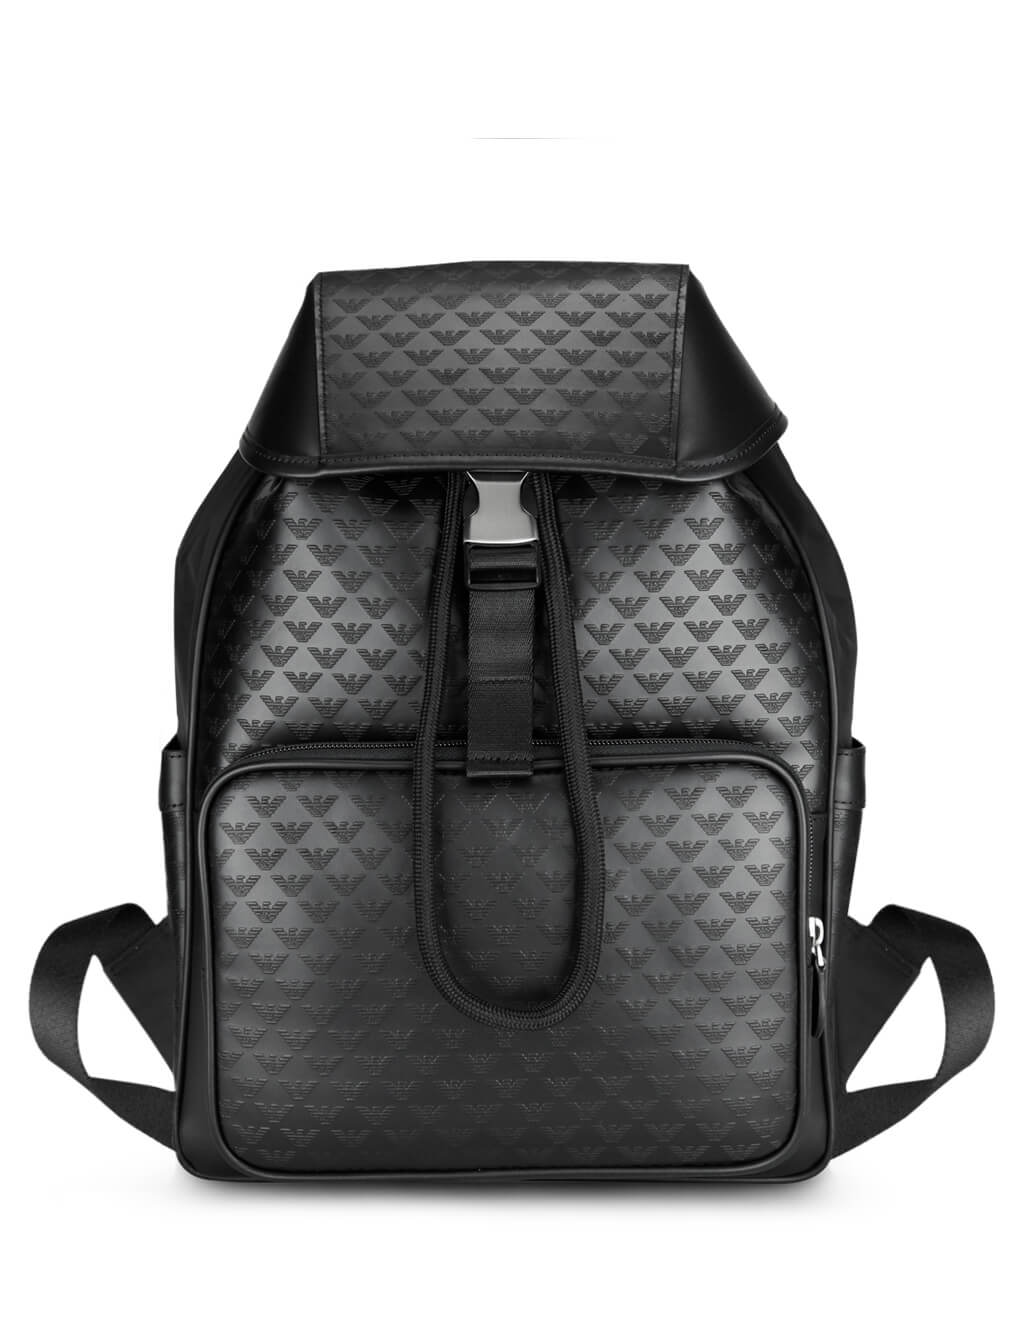 armani leather backpack mens